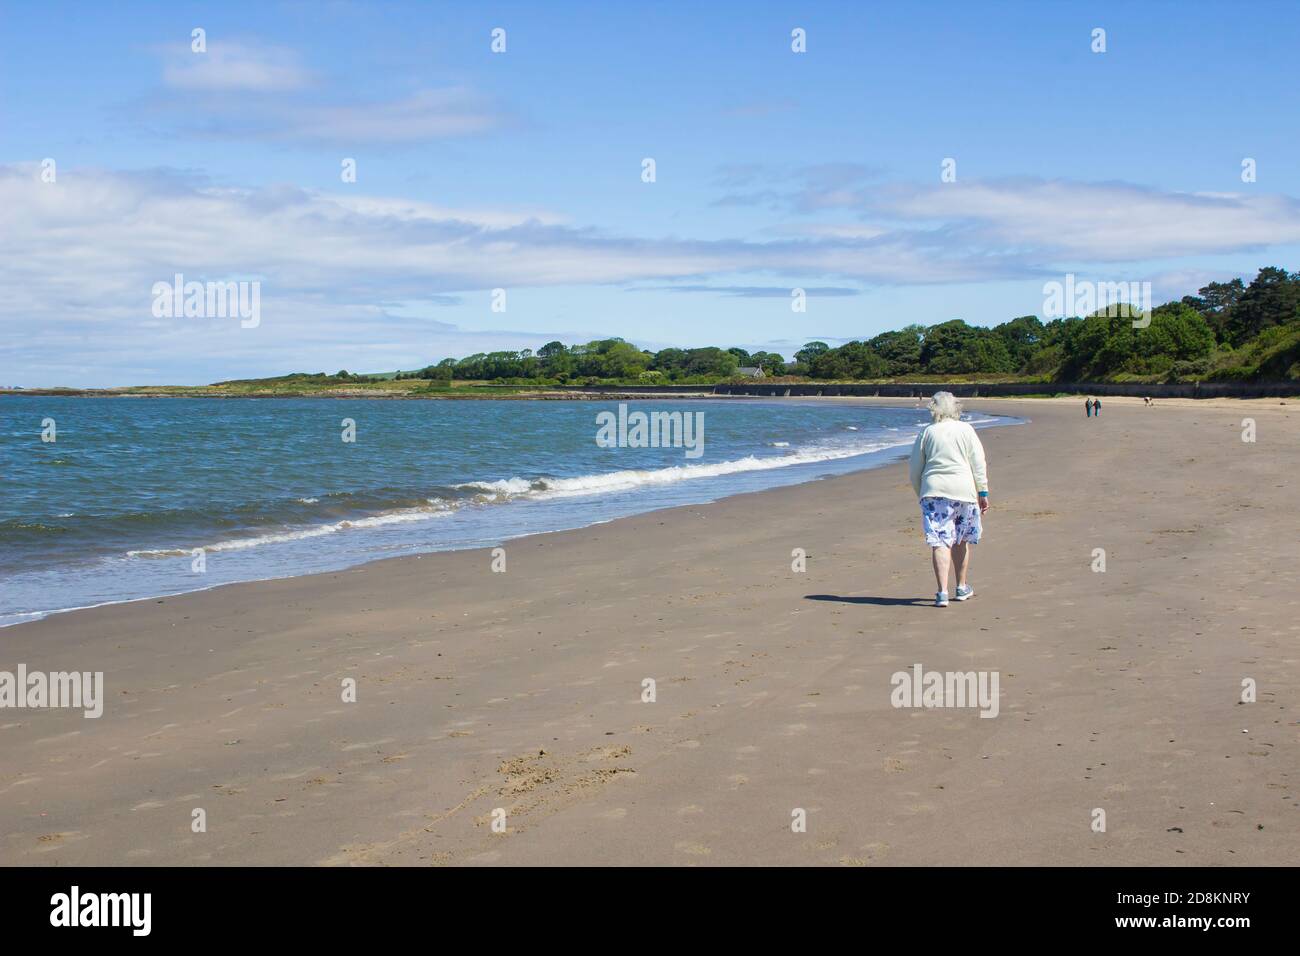 6 June 2020 An elderly woman and others walk the beach for exercise during the Corona Virus pandemic at Ballyholme in Bangor Northern Ireland on a bre Stock Photo